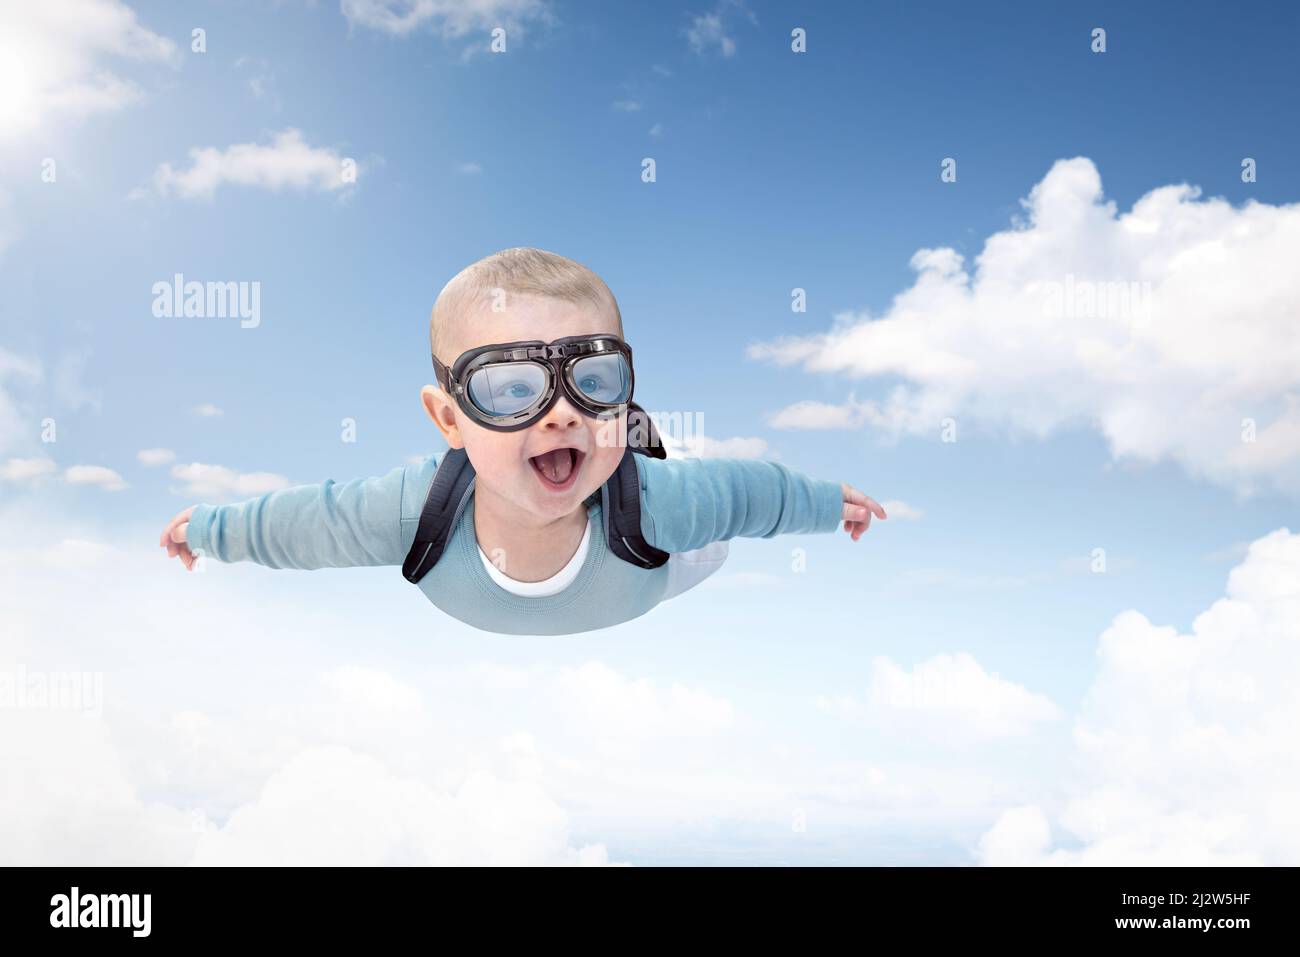 Skydiving baby flying through the sky Stock Photo